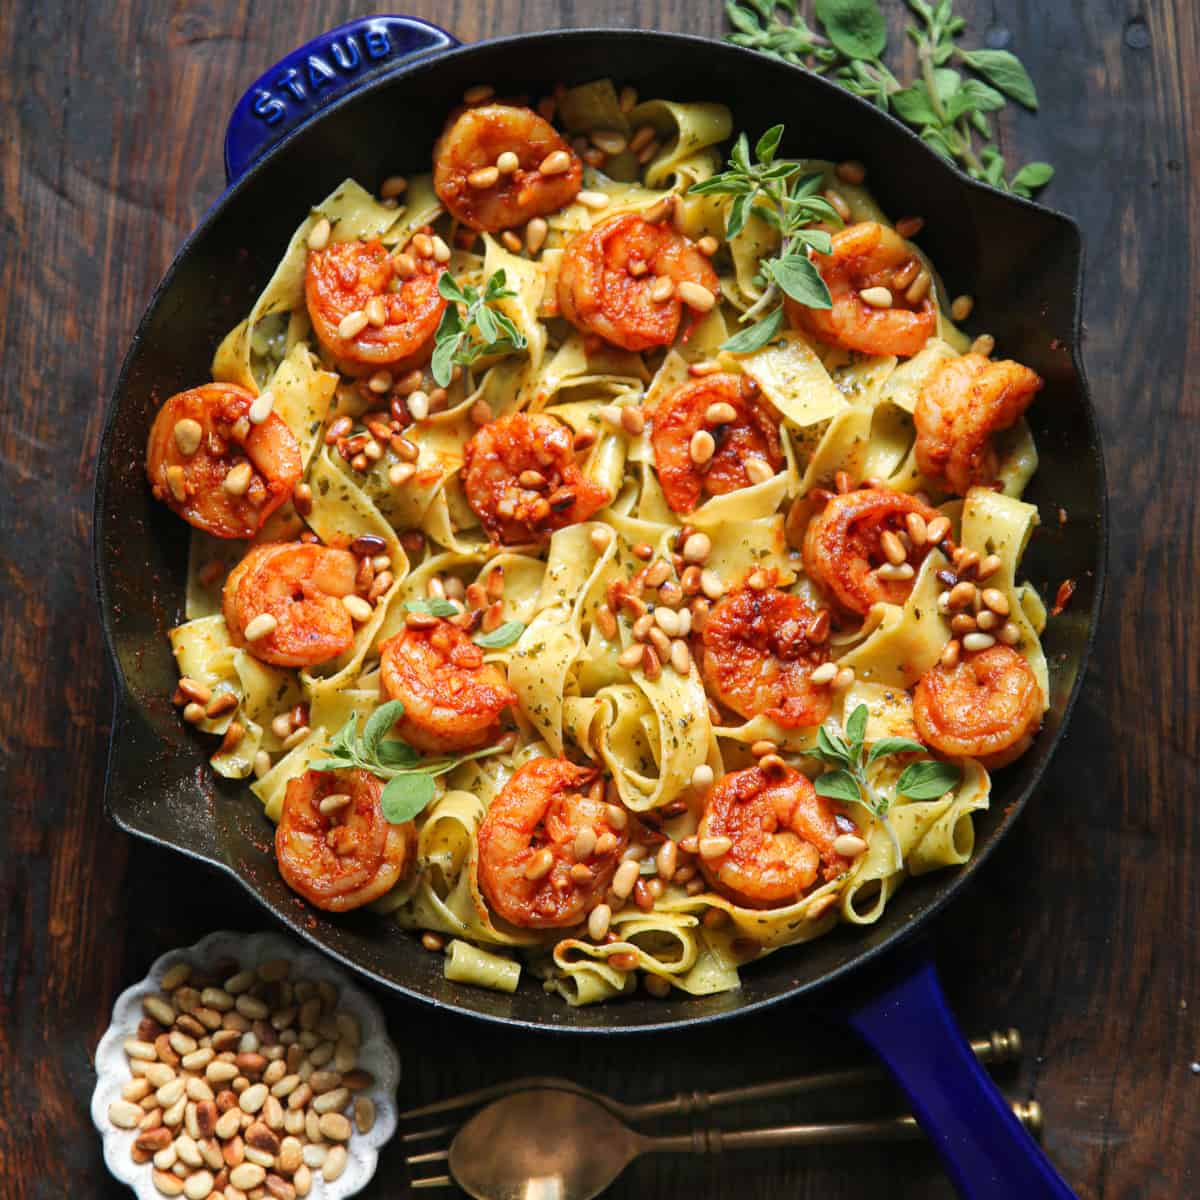 shrimp pesto pasta with pine nuts - in a cast iron skillet.